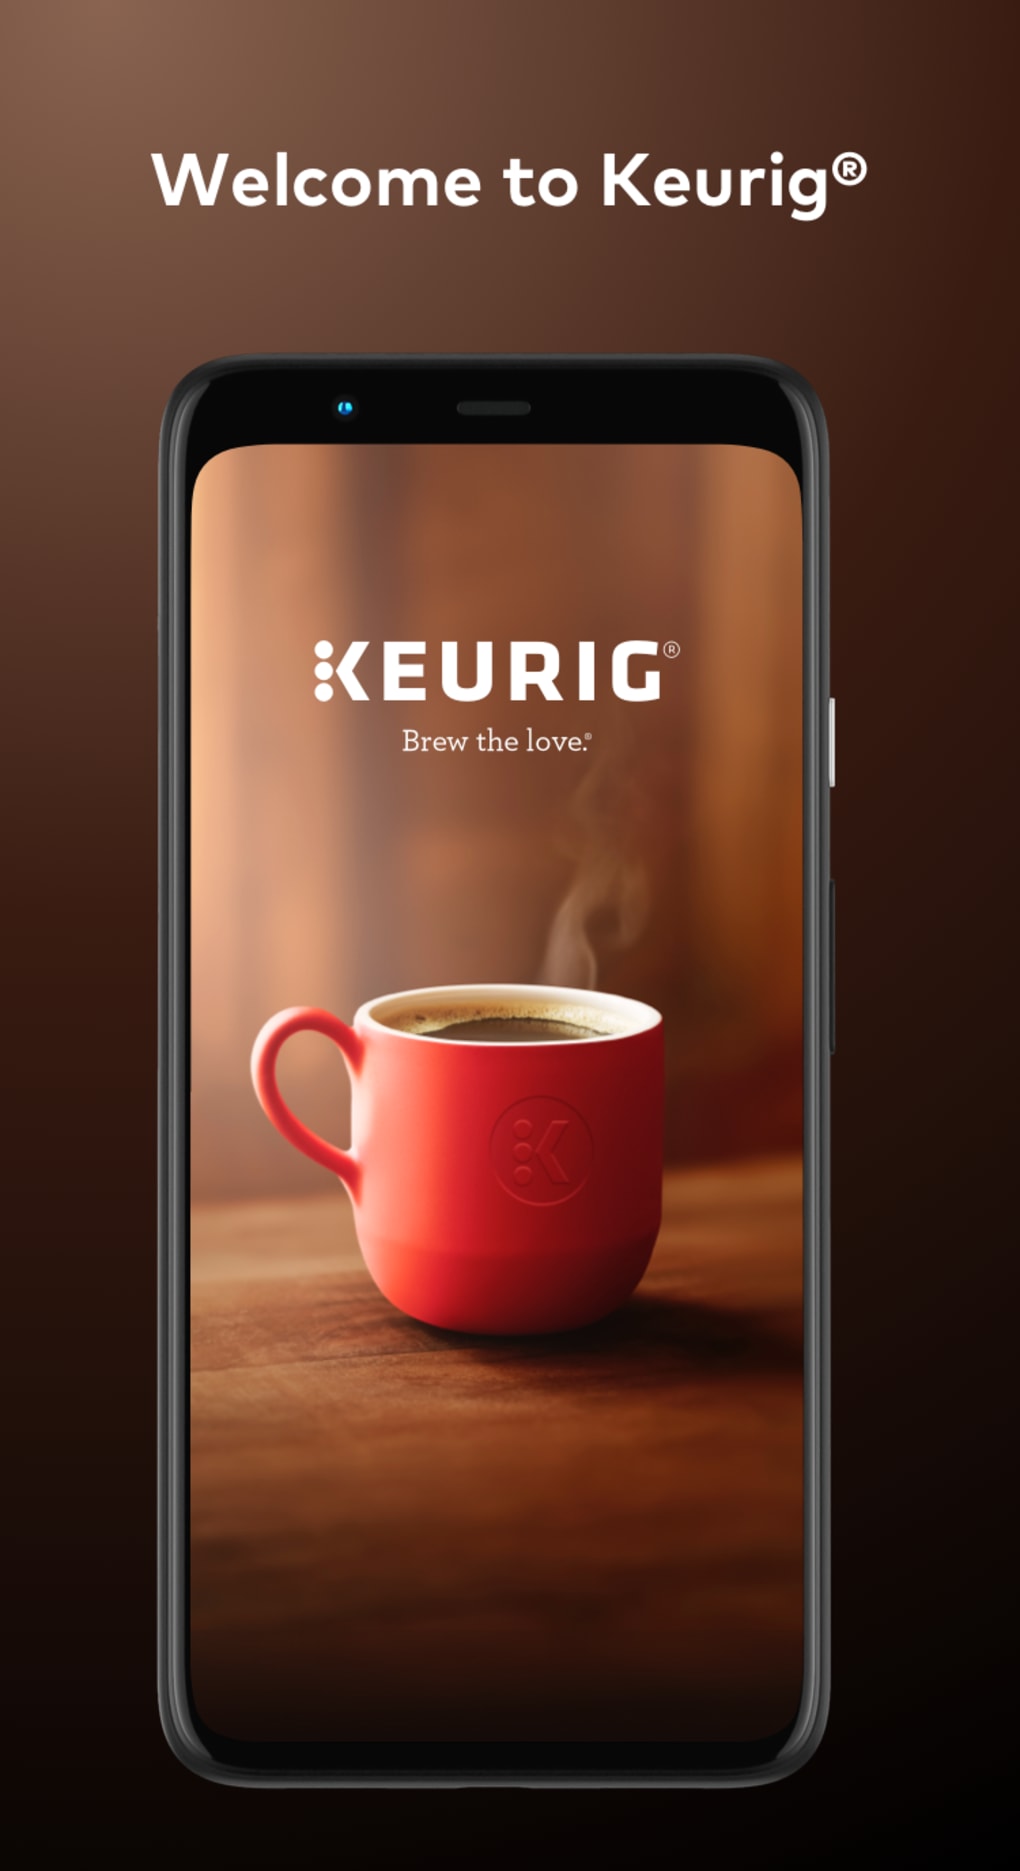 King Coffee Super App – Apps on Google Play